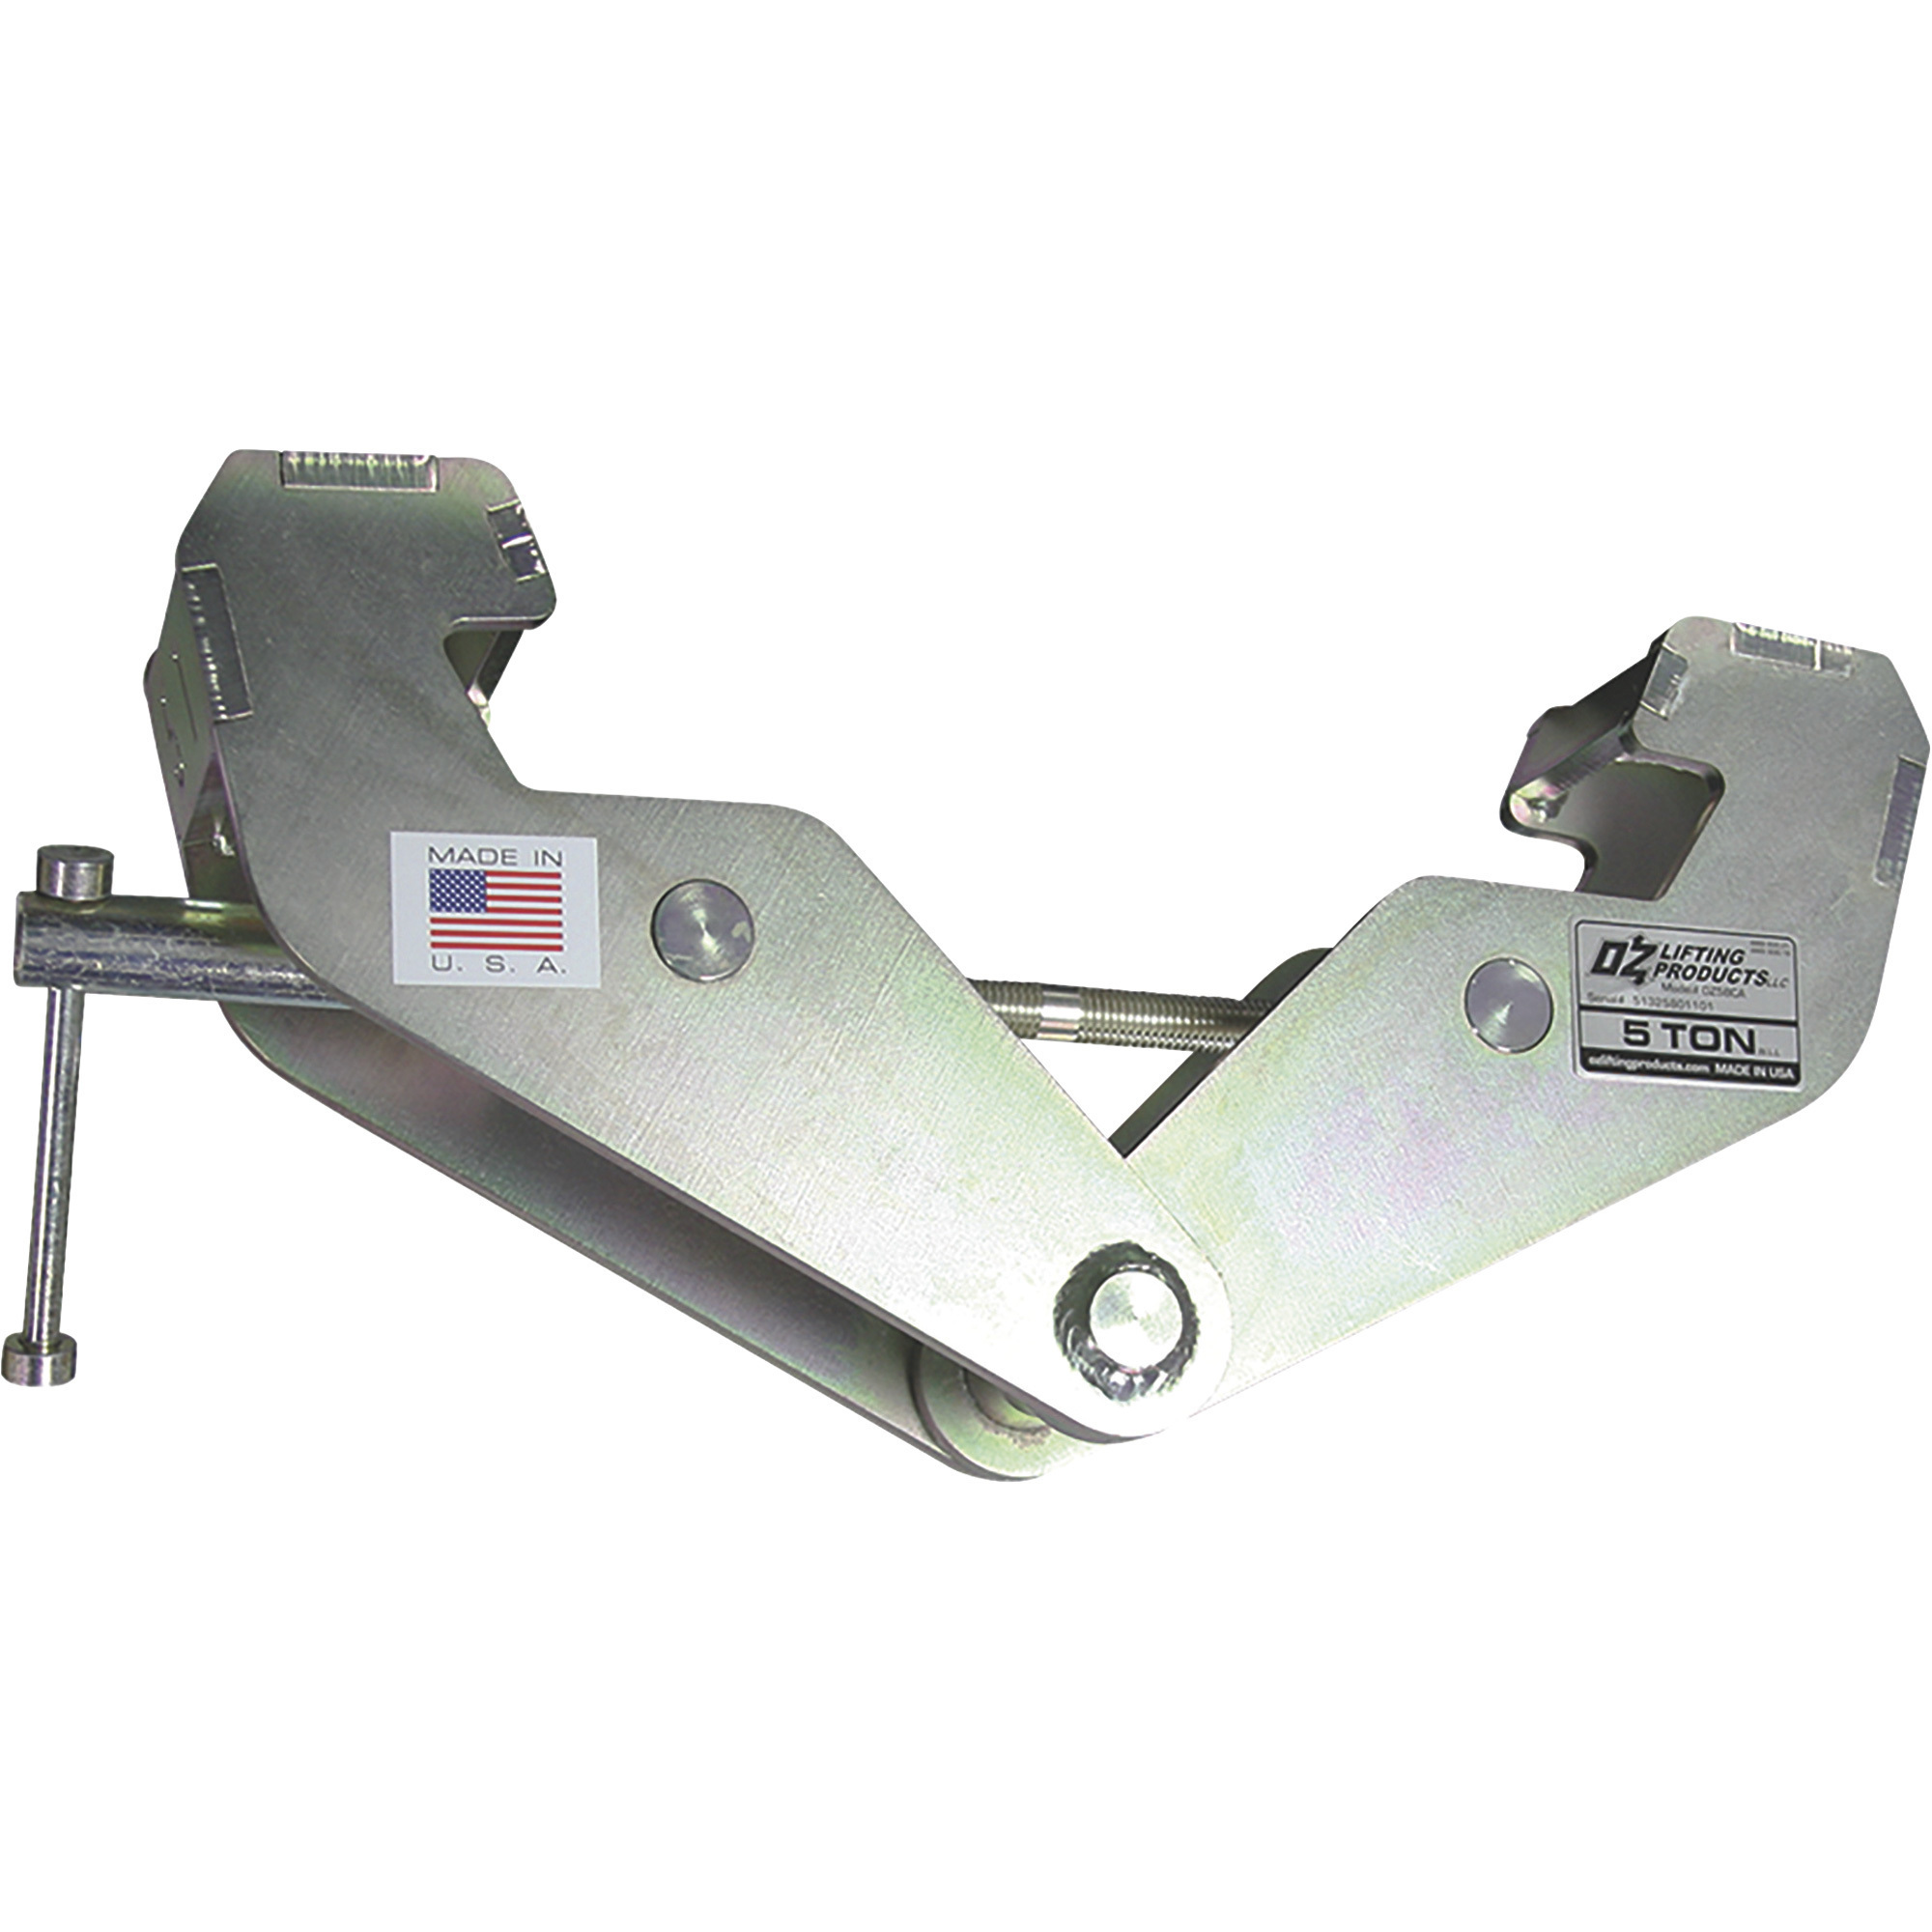 OZ Lifting Products Fully Welded Beam Clamp â 3-Ton Capacity, 3.15â13Inch Flange Width, Model OZ3BCA